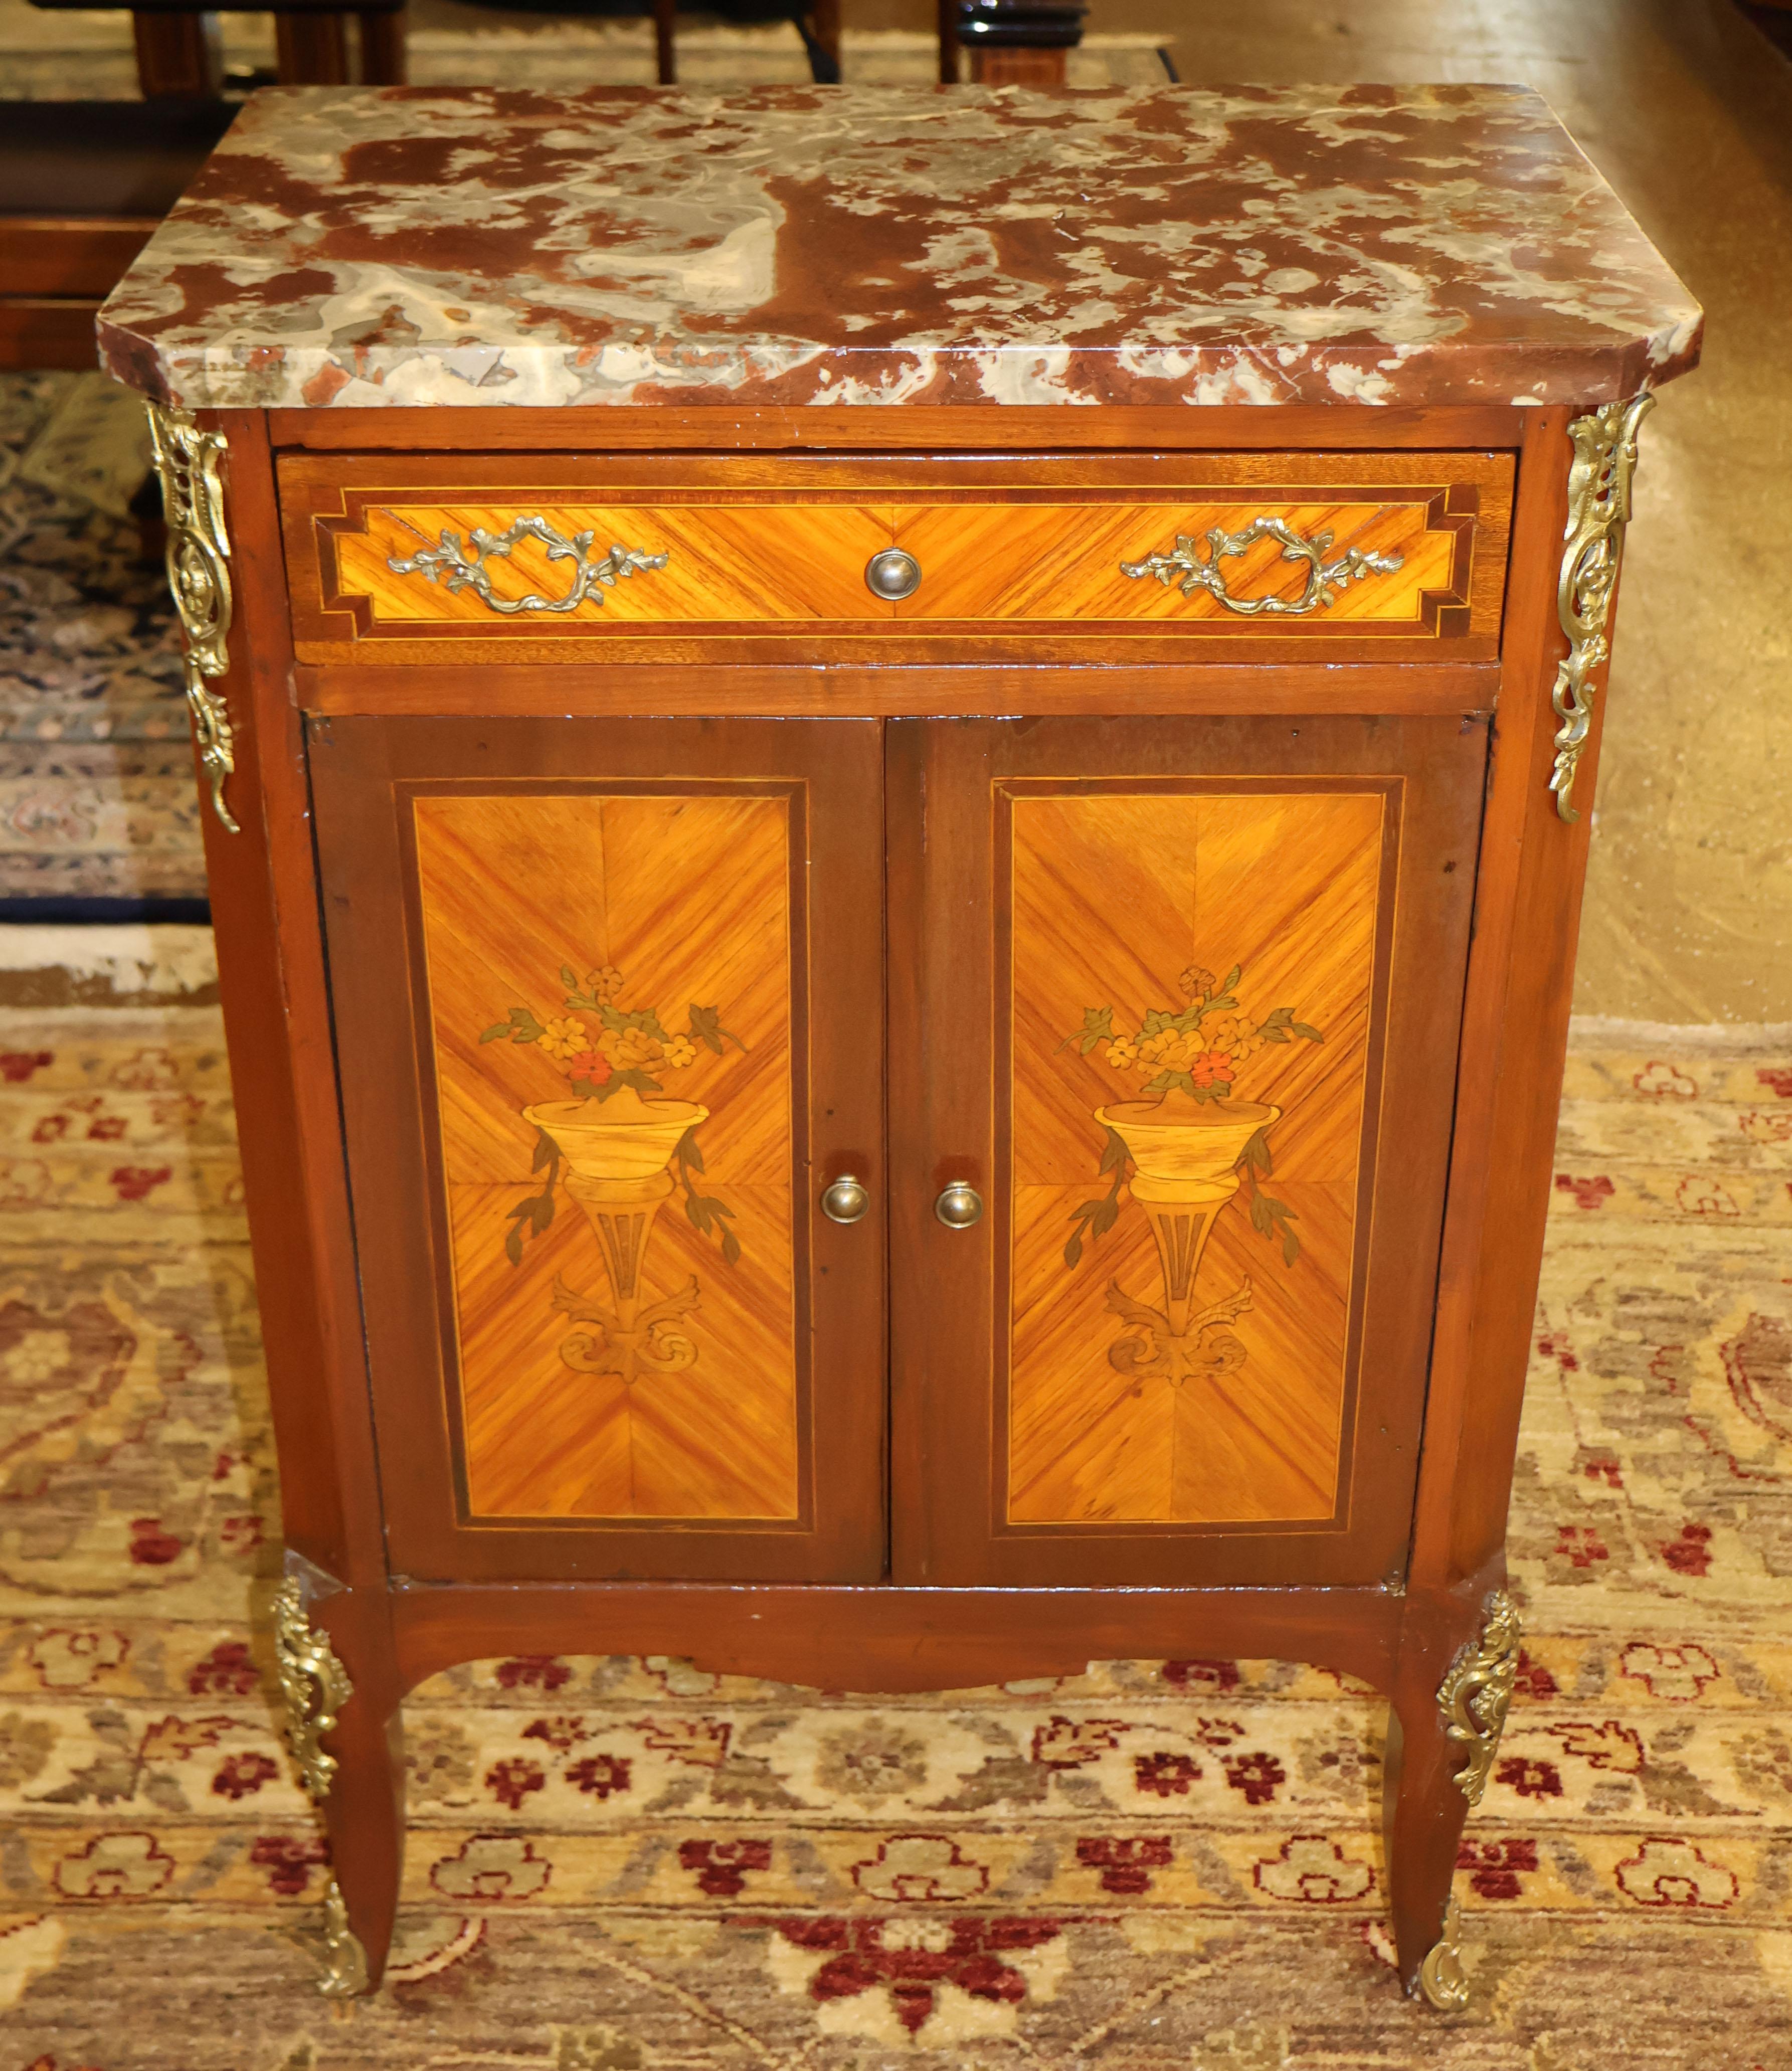 ​19th Century French Louis XV Style Marble Top Satinwood Inlaid Side Cabinet

Dimensions : 31